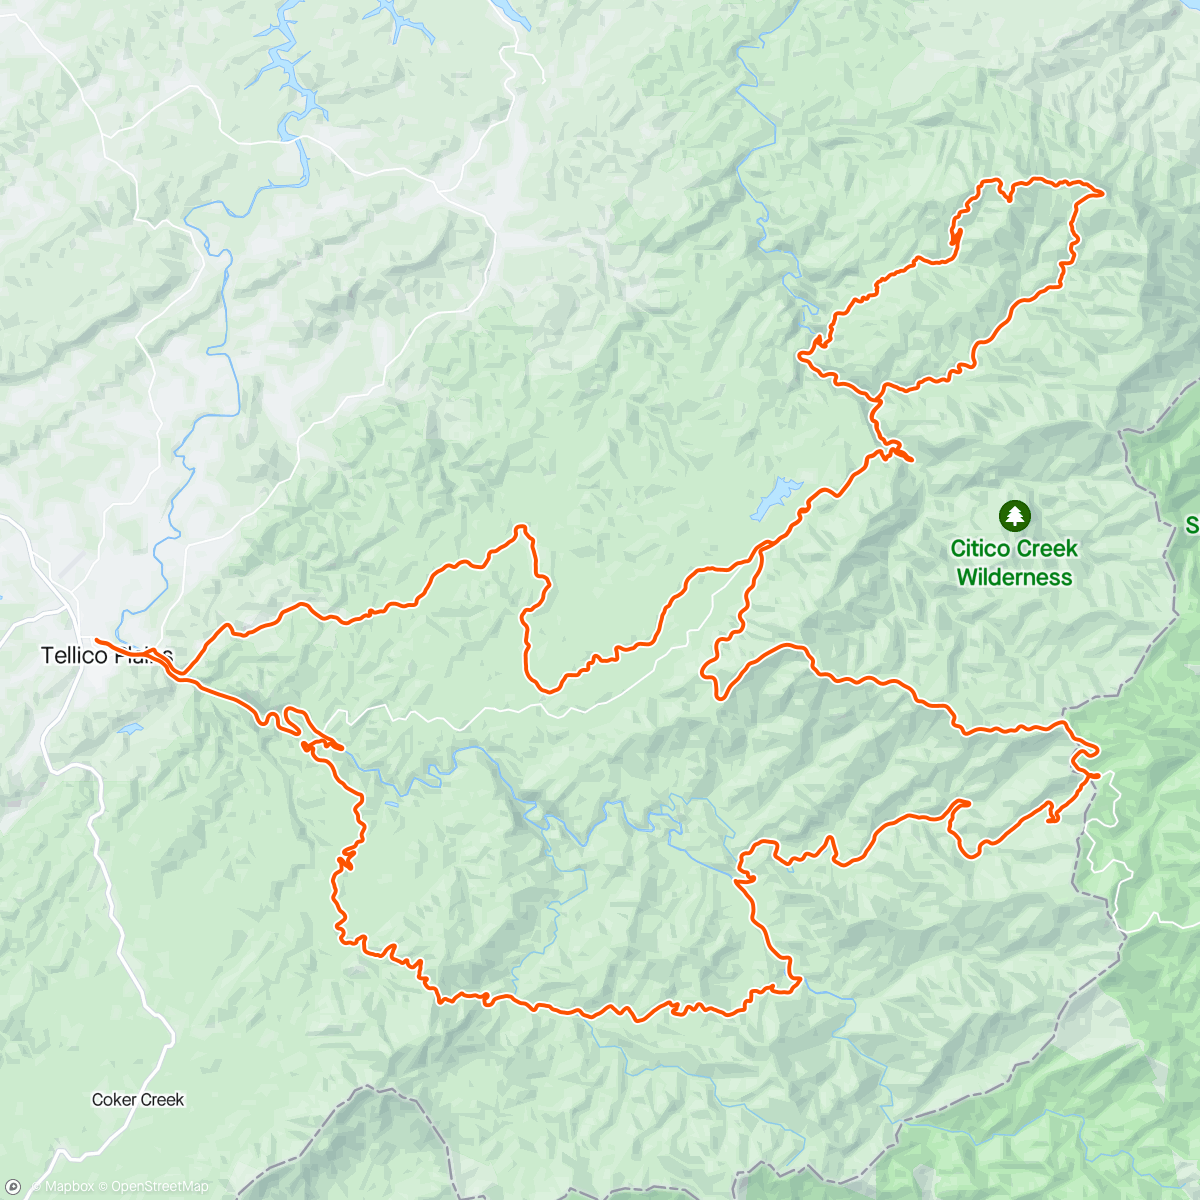 Mapa de la actividad, Generally I try not to do basic endurance biking on gravel bc going uphill is too hard. But sometimes it’s the nicest day of the year and you must drive (laboriously) the nation’s most beautiful gravel route